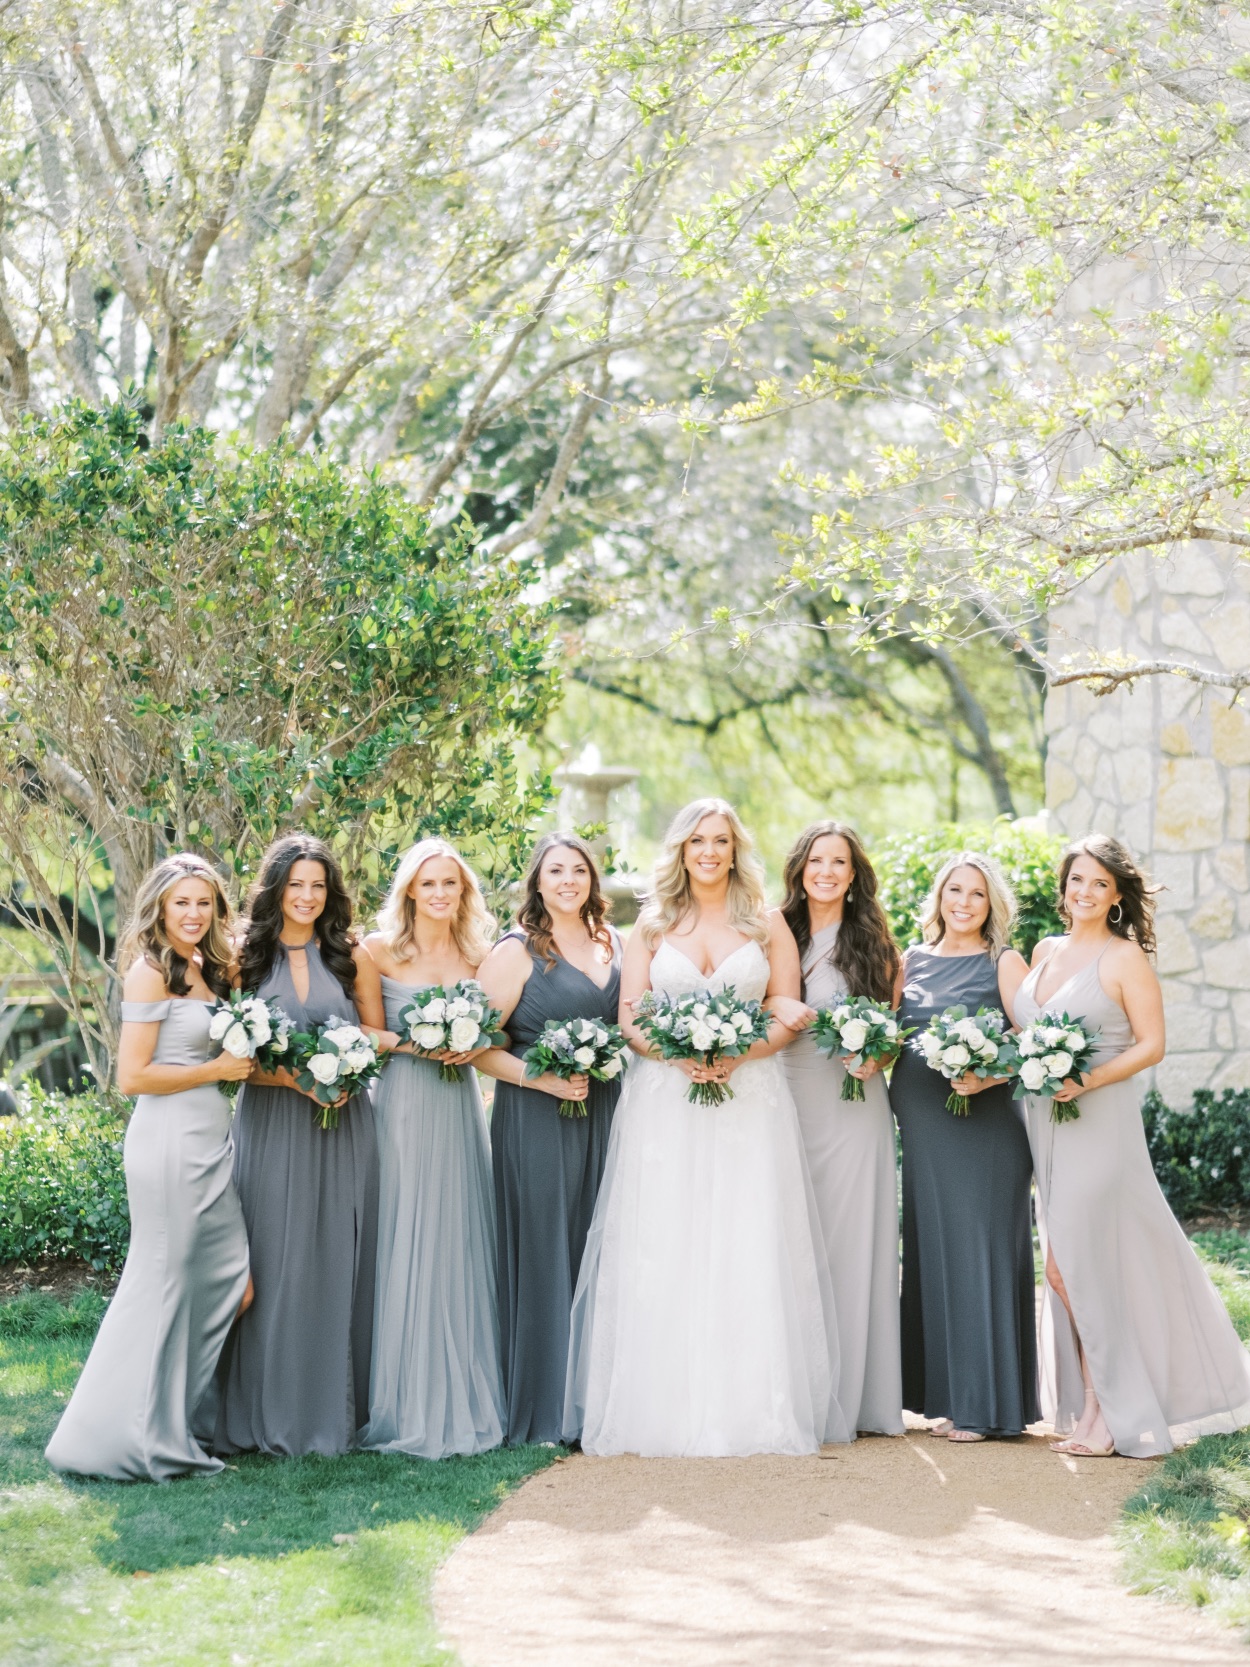 Erica + Hunter's Luxurious, Rustic Wedding at Hotel Drover